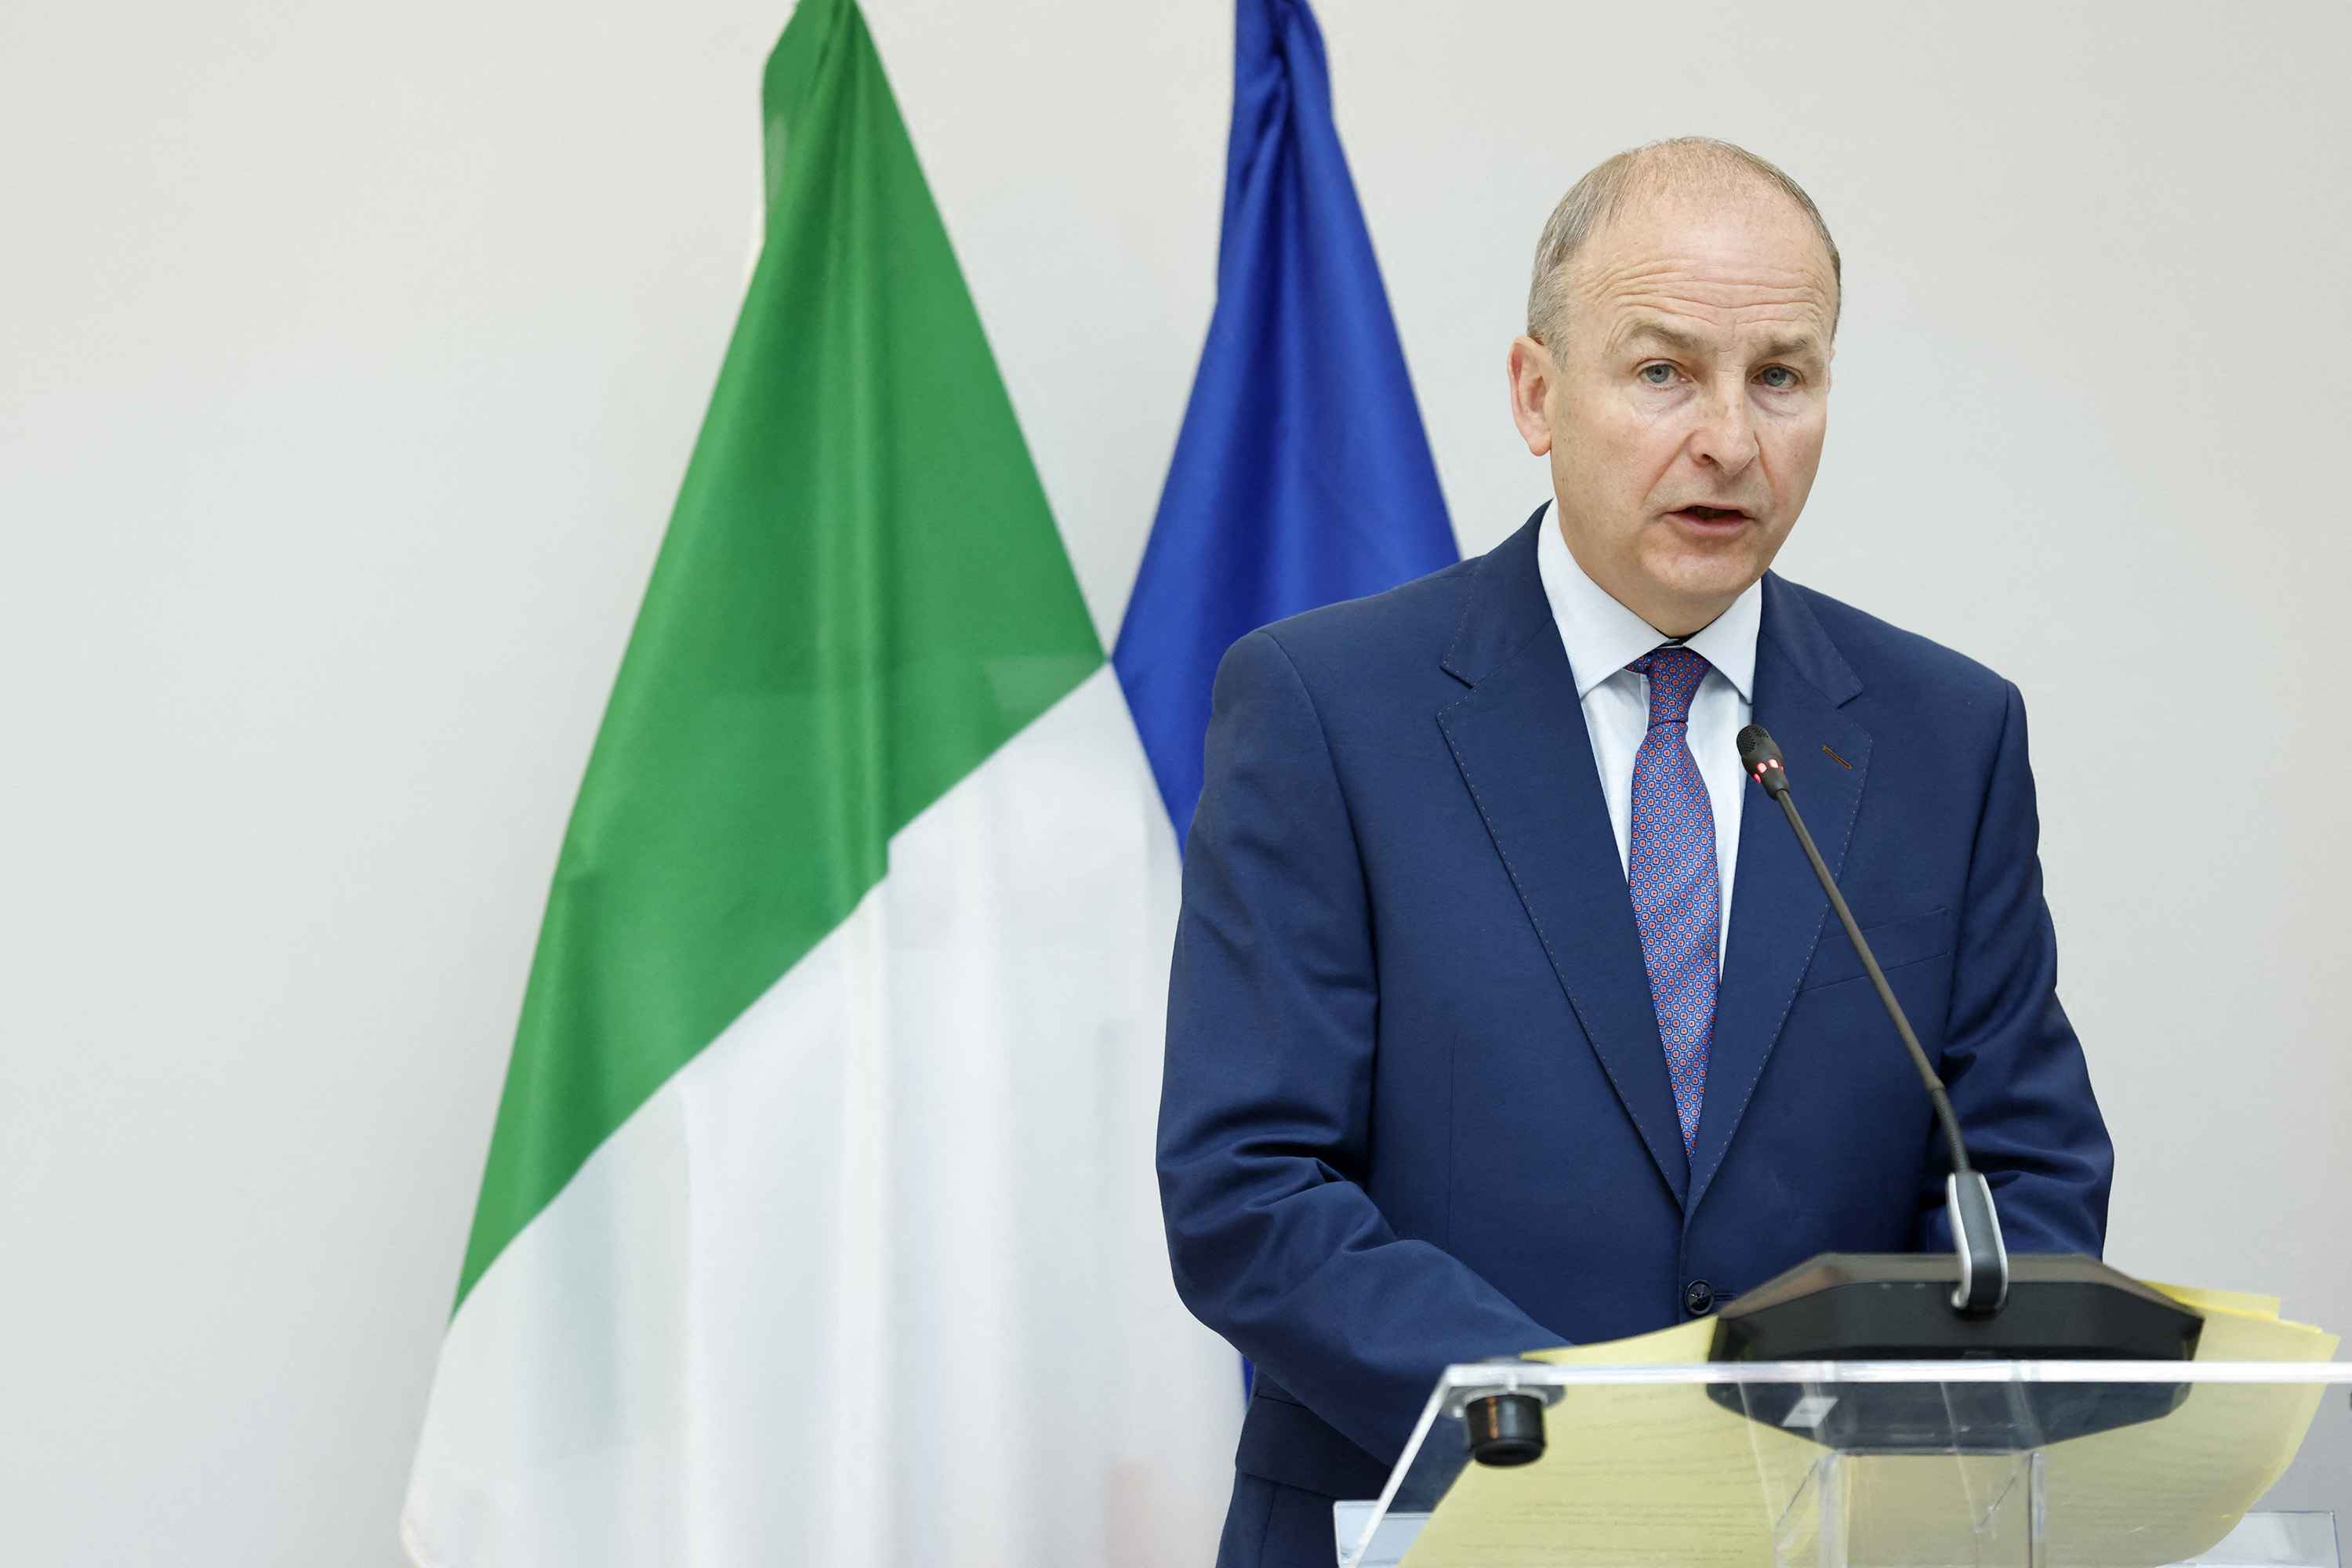 Irish Foreign minister Micheal Martin speaks during a joint press conference with his Spanish and Norwegian counterparts in Brussels on May 27.